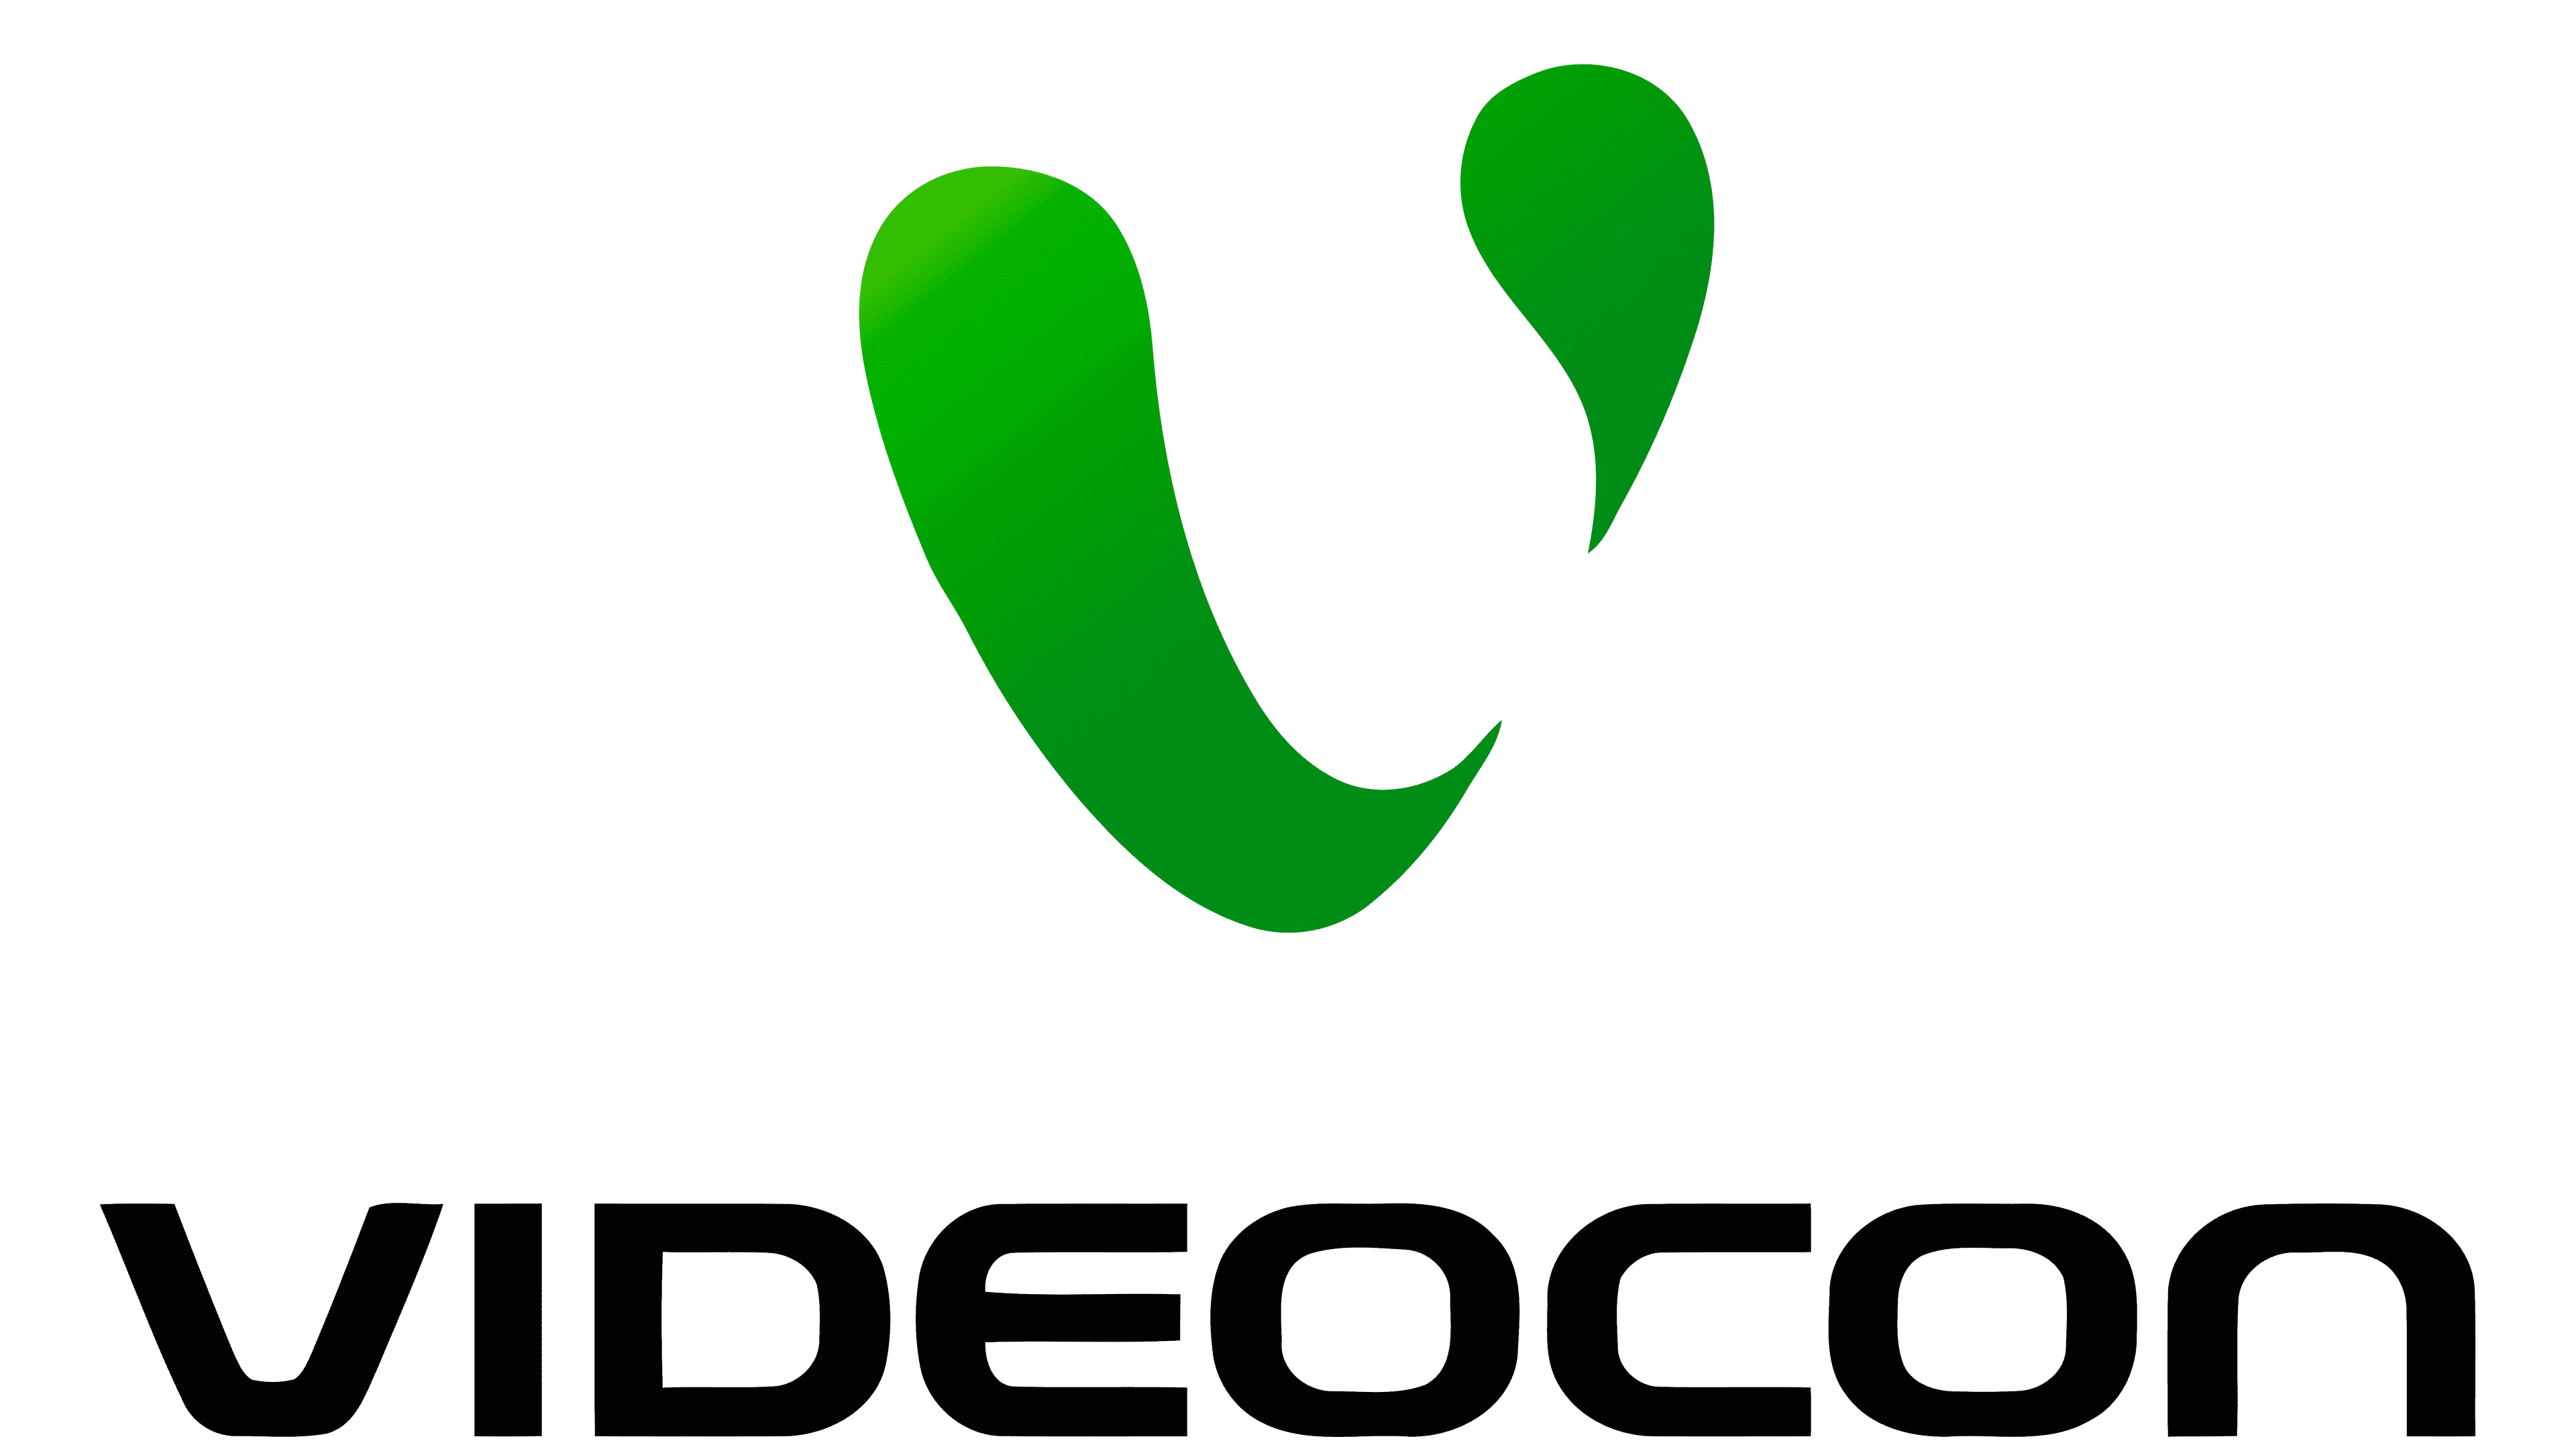 Videocon Logo, PNG, Symbol, History, Meaning